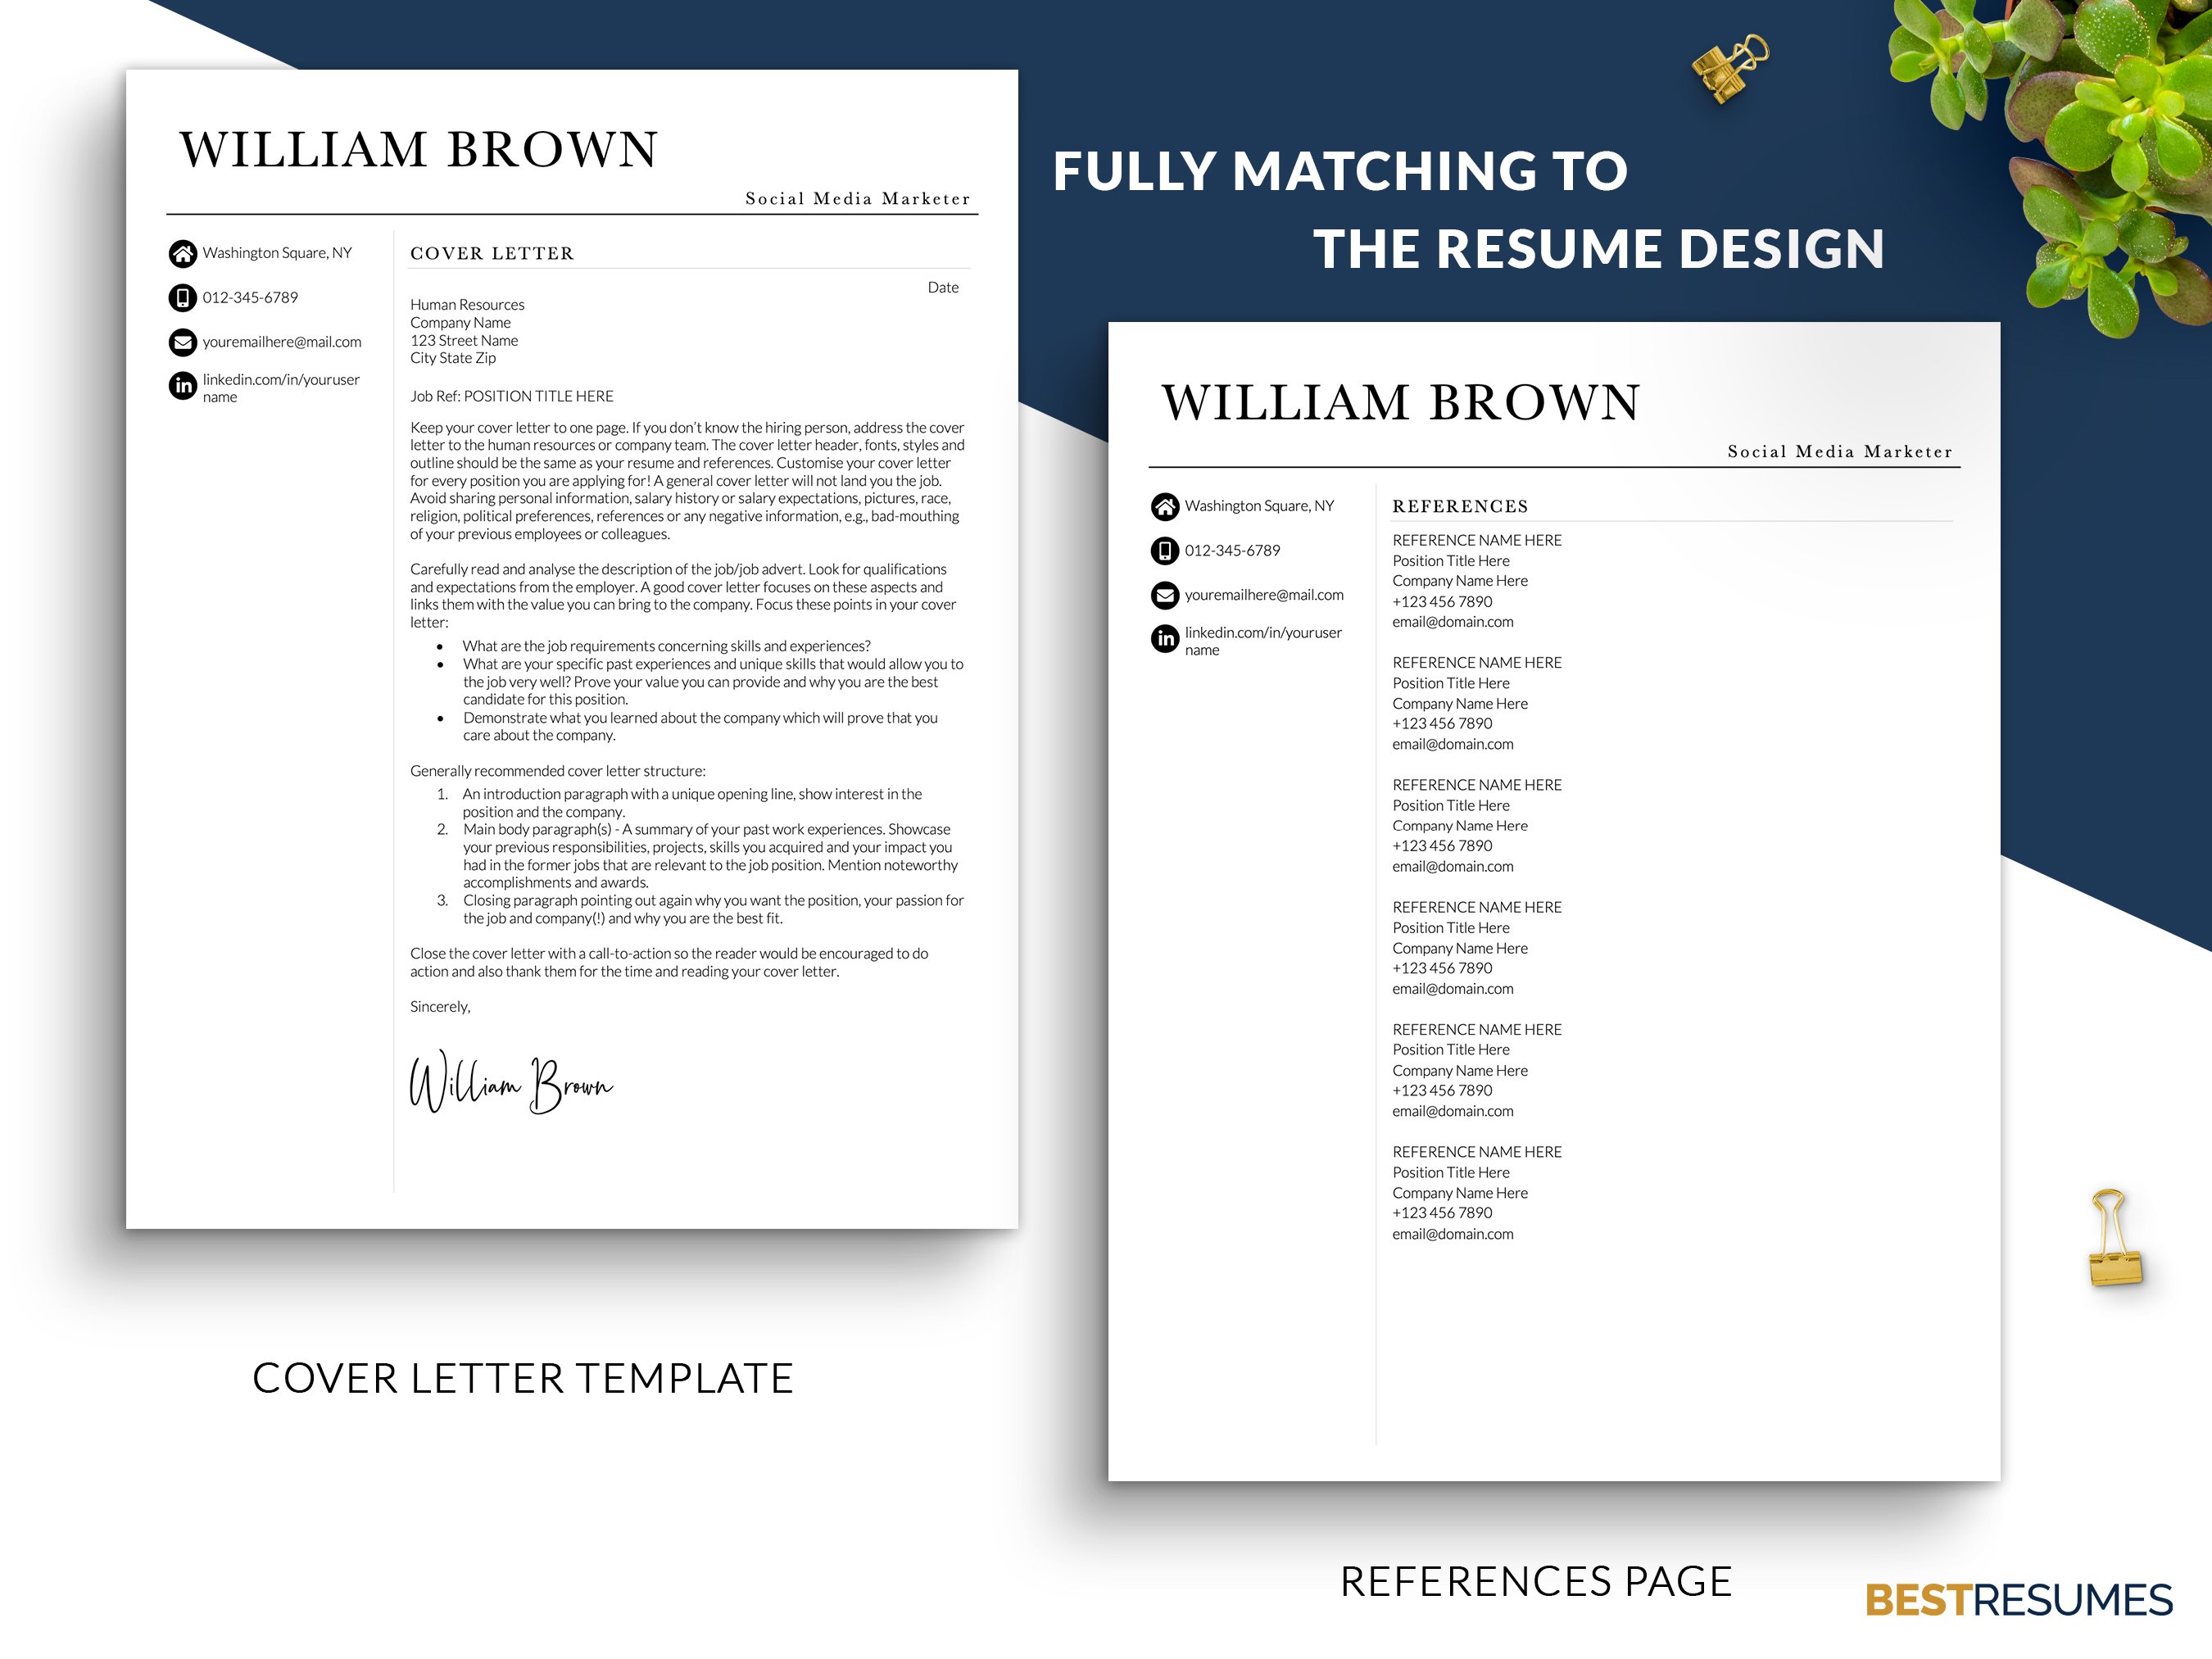 social media marketing resume template cover letter references william brown 407